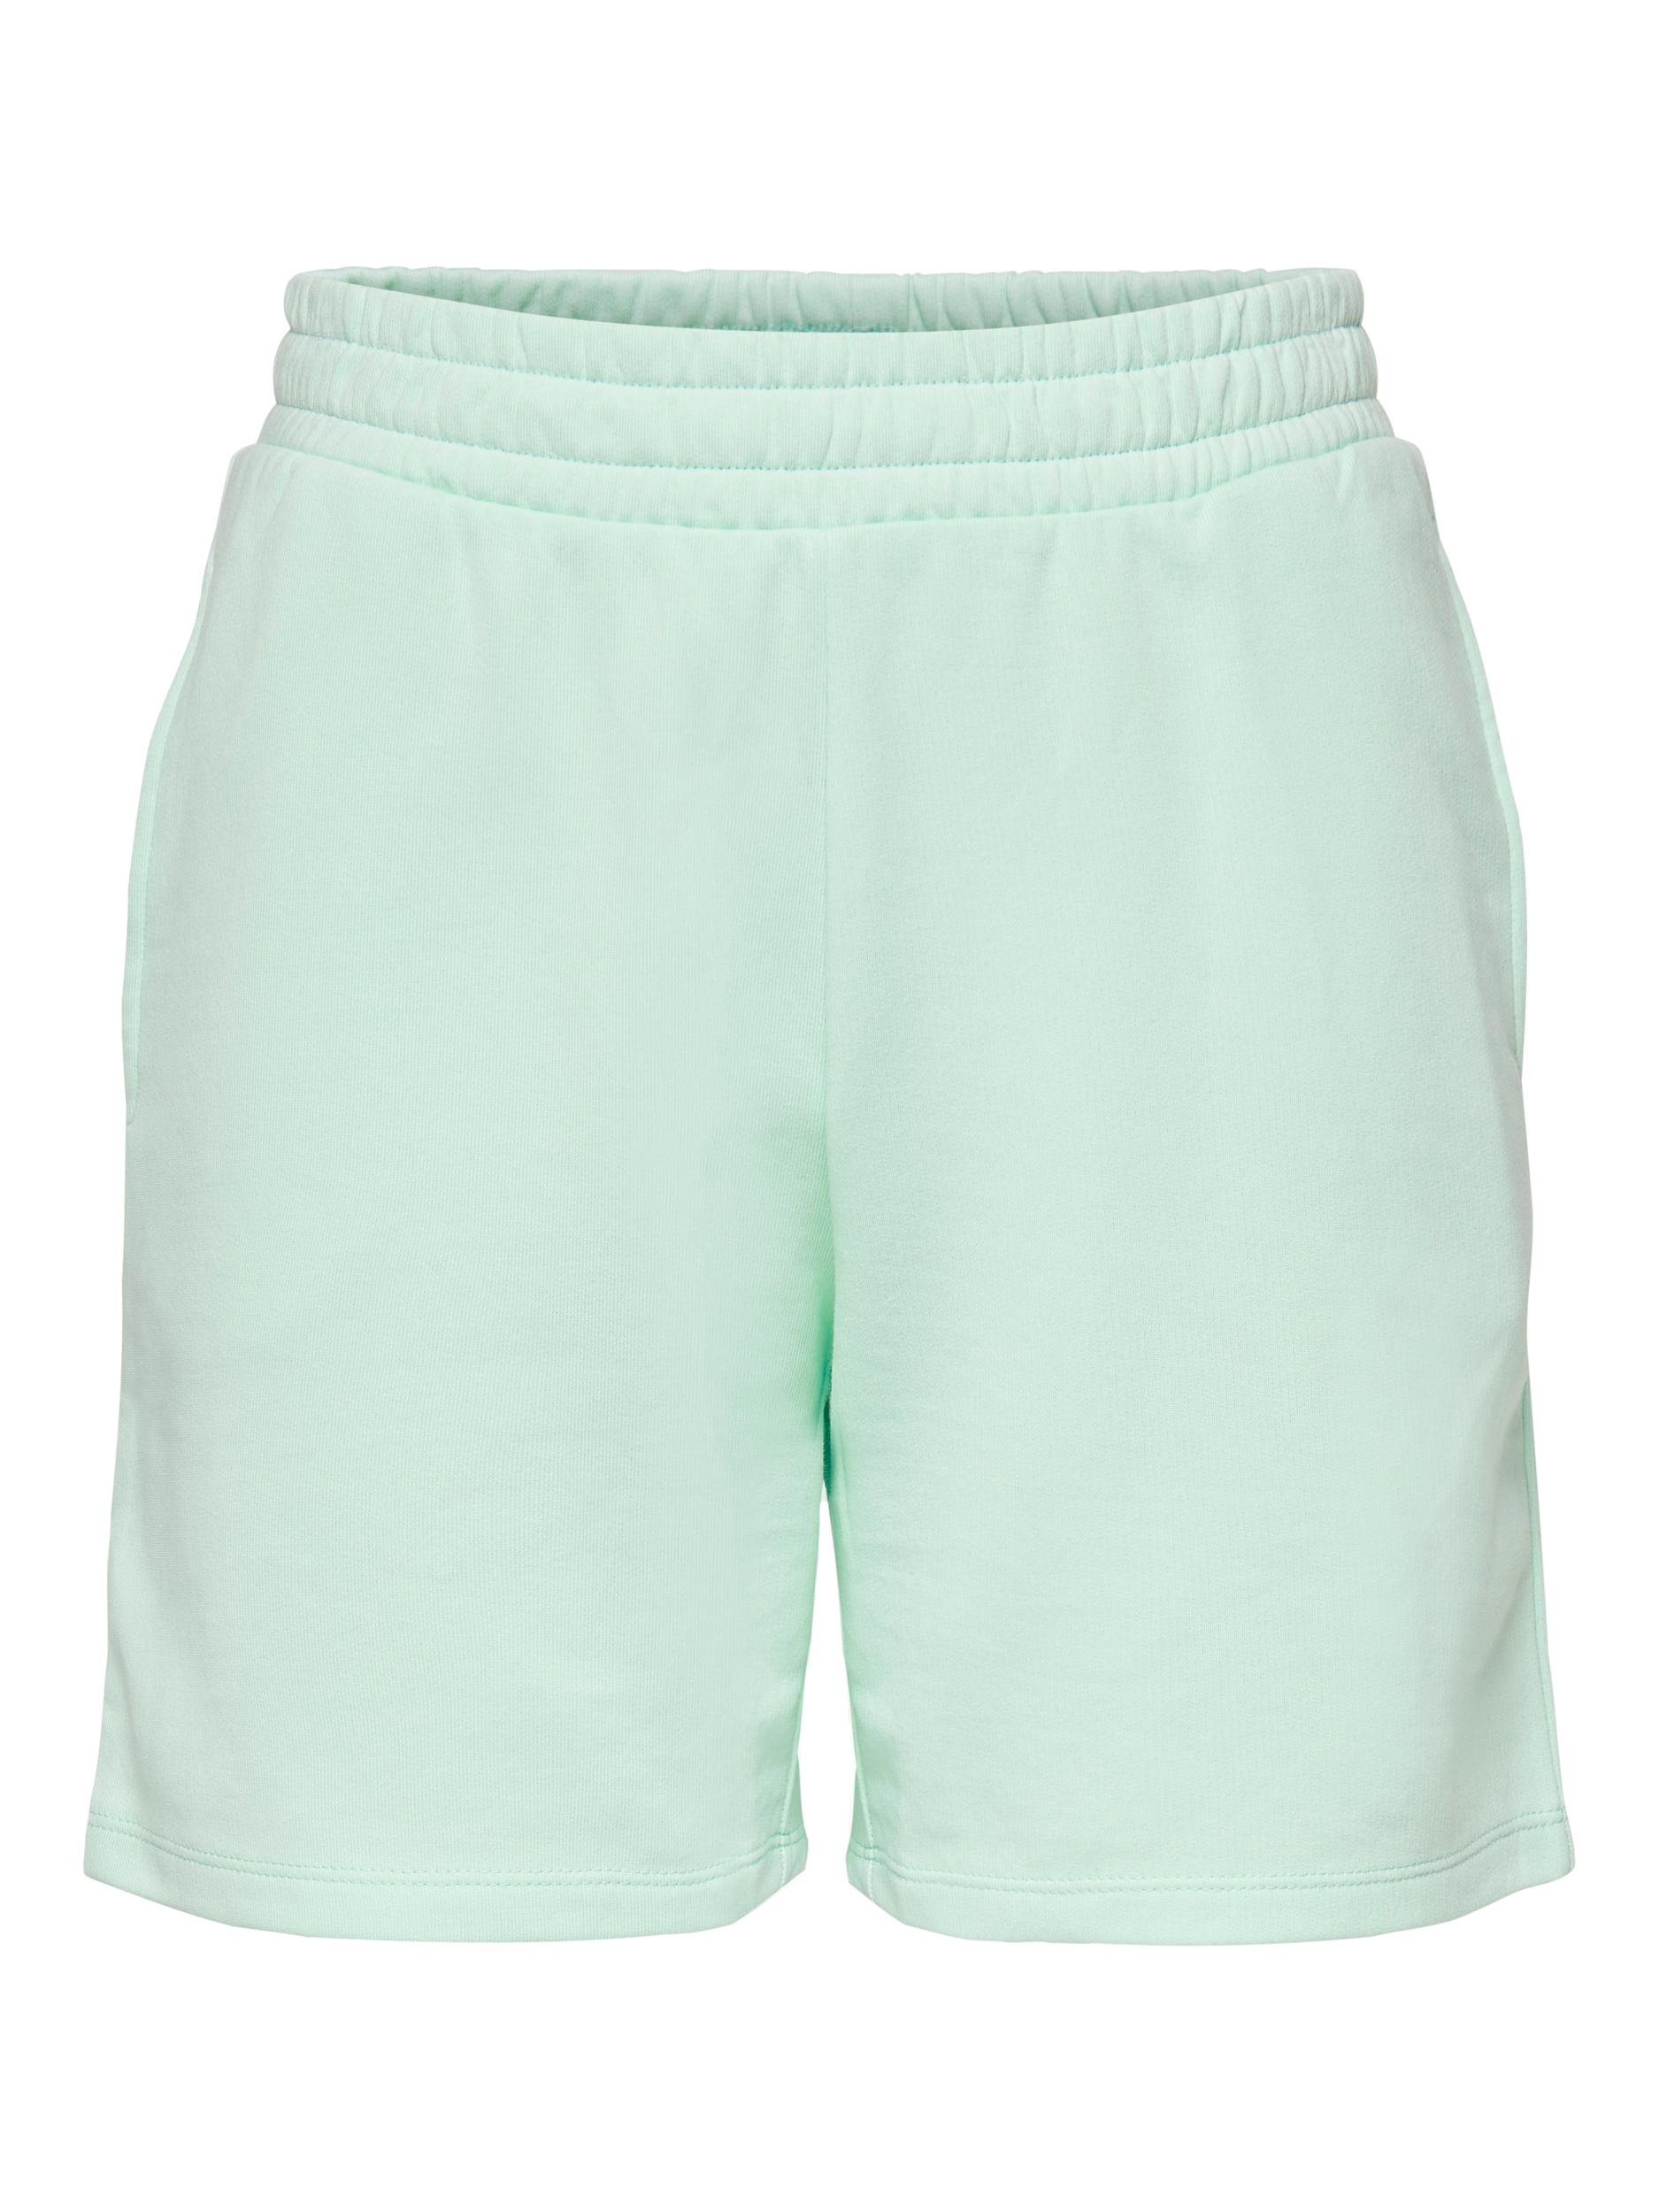 FINAL SALE - Lissi relaxed fit sweat shorts, BROOK GREEN, large